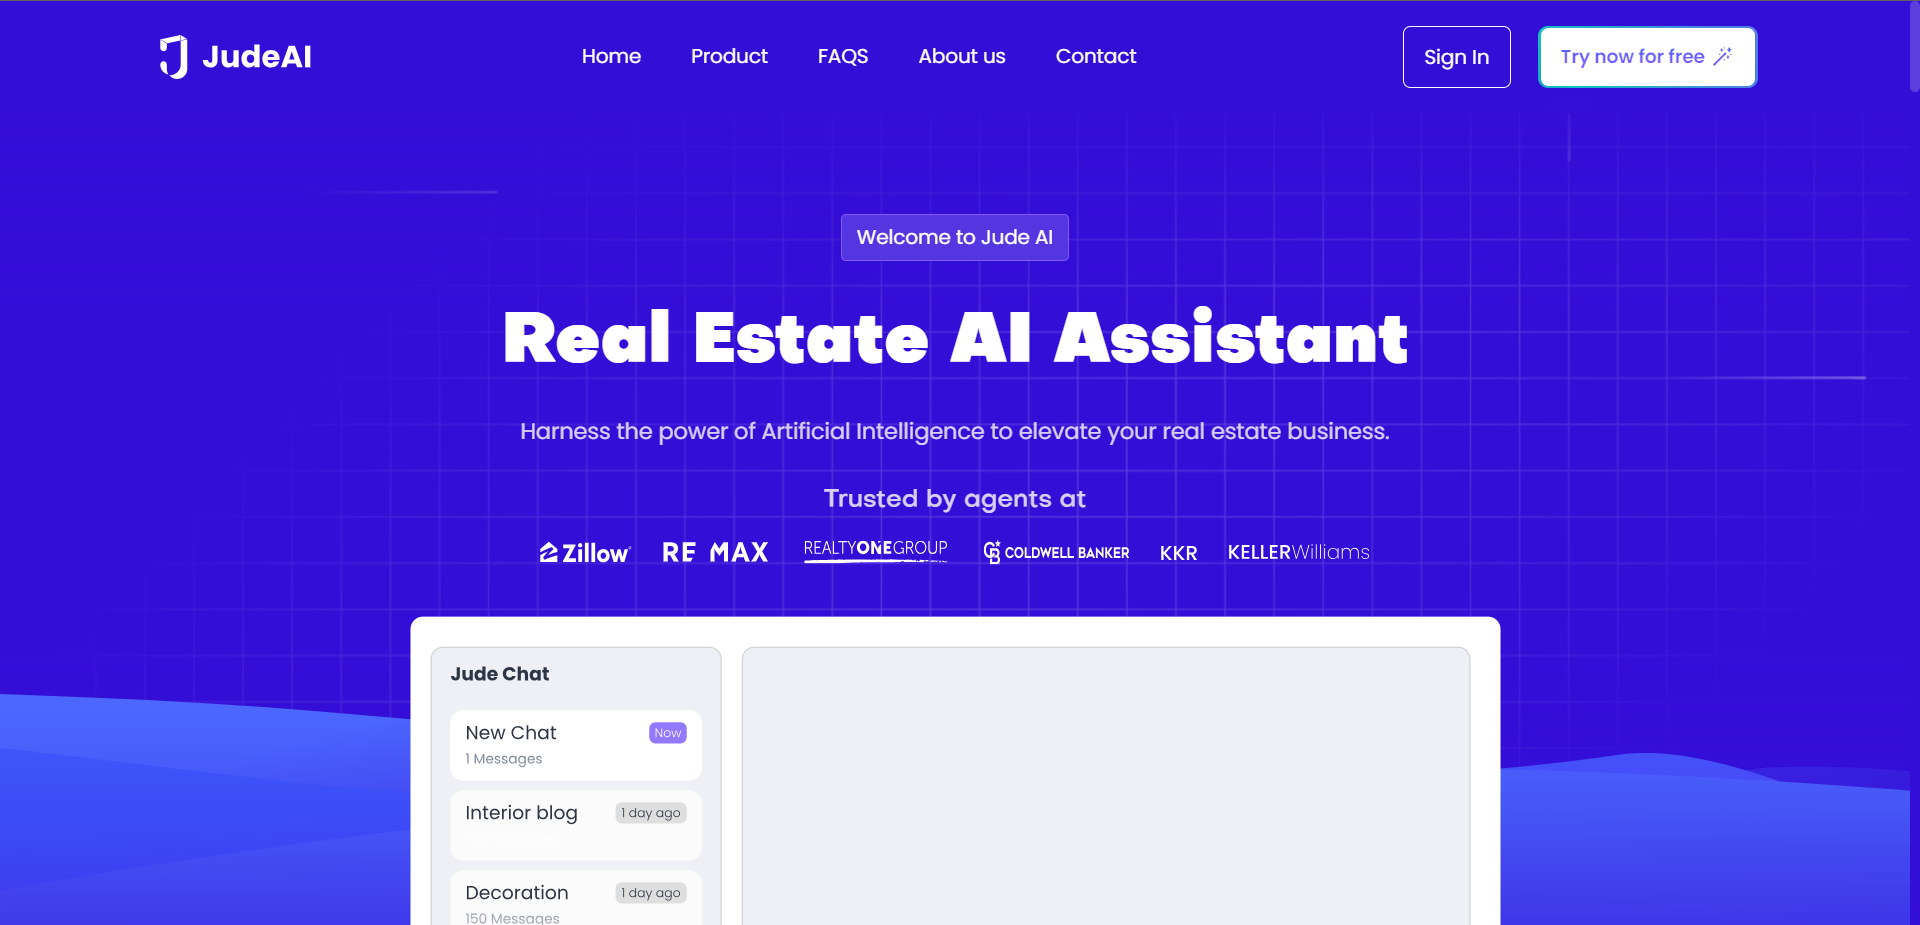 Jude AIJude AI empowers real estate professionals with AI solutions